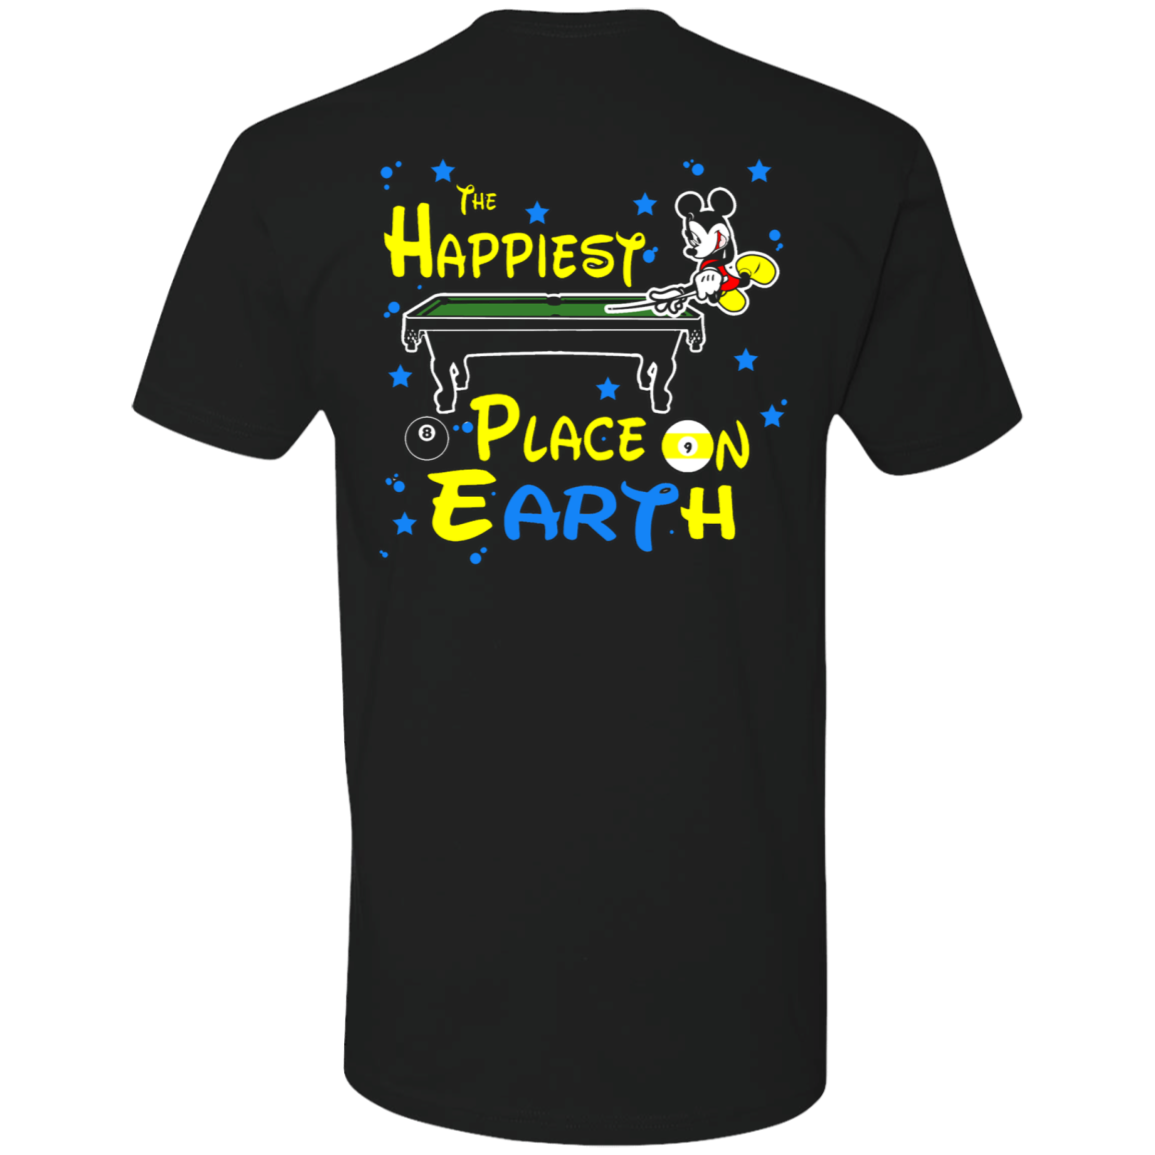 The GHOATS custom design #14. The Happiest Place On Earth. Fan Art. Premium Short Sleeve T-Shirt